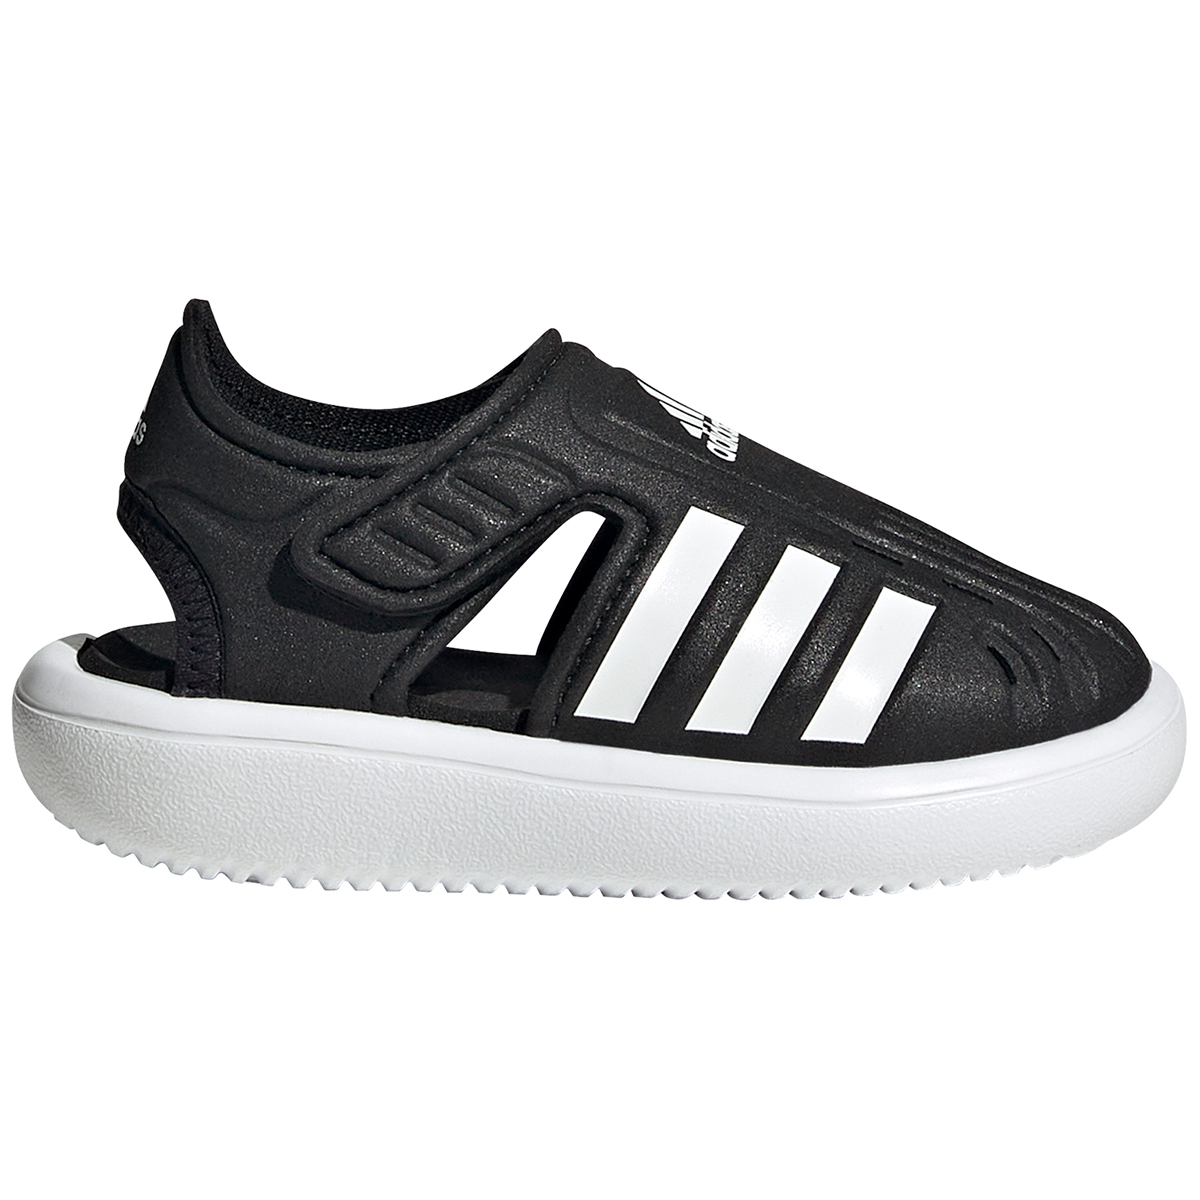 Adidas Infant Kids' Closed Toe Water Sandals